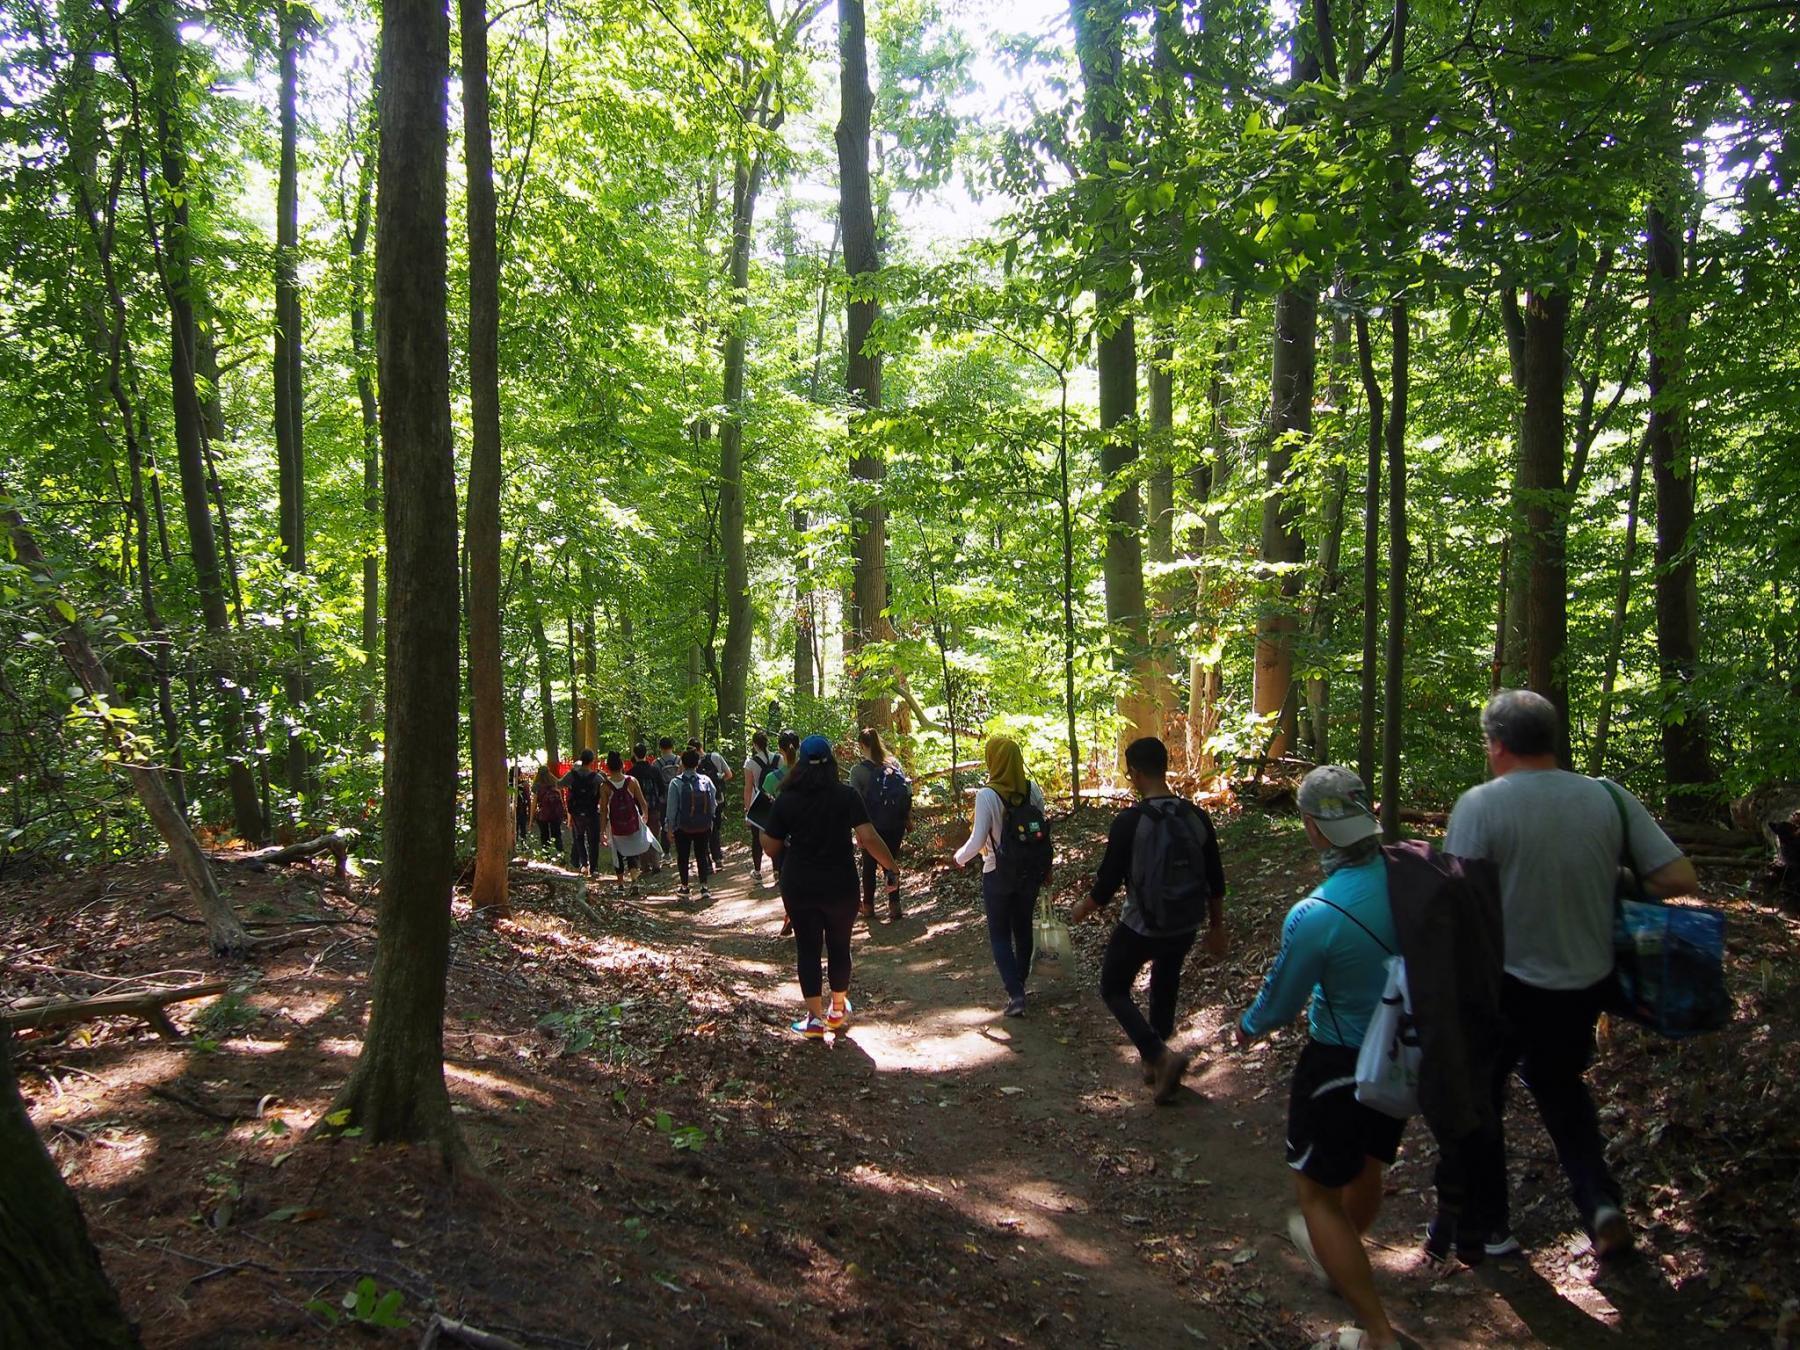 Students walking along a trail in the forest